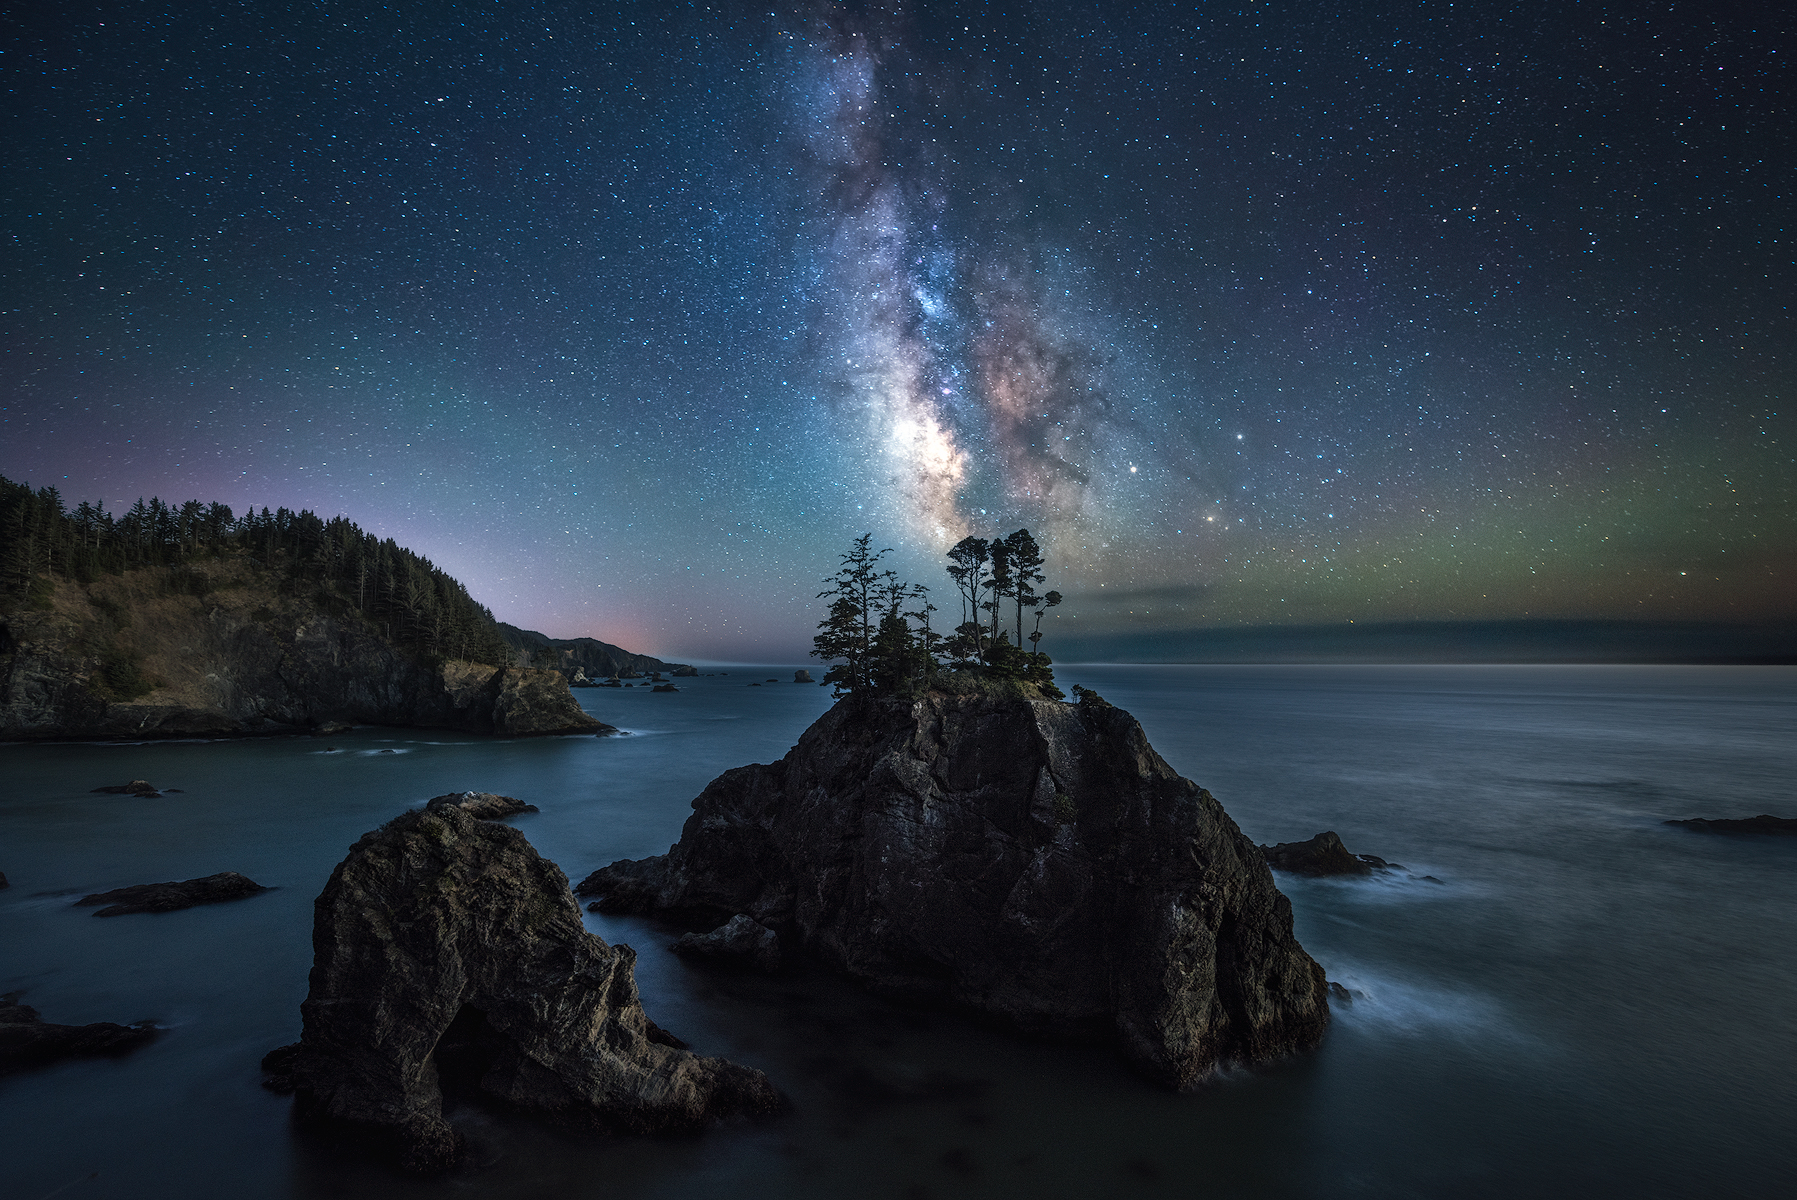 27. The Milky Way shines bright in Samuel H Boardman State Park